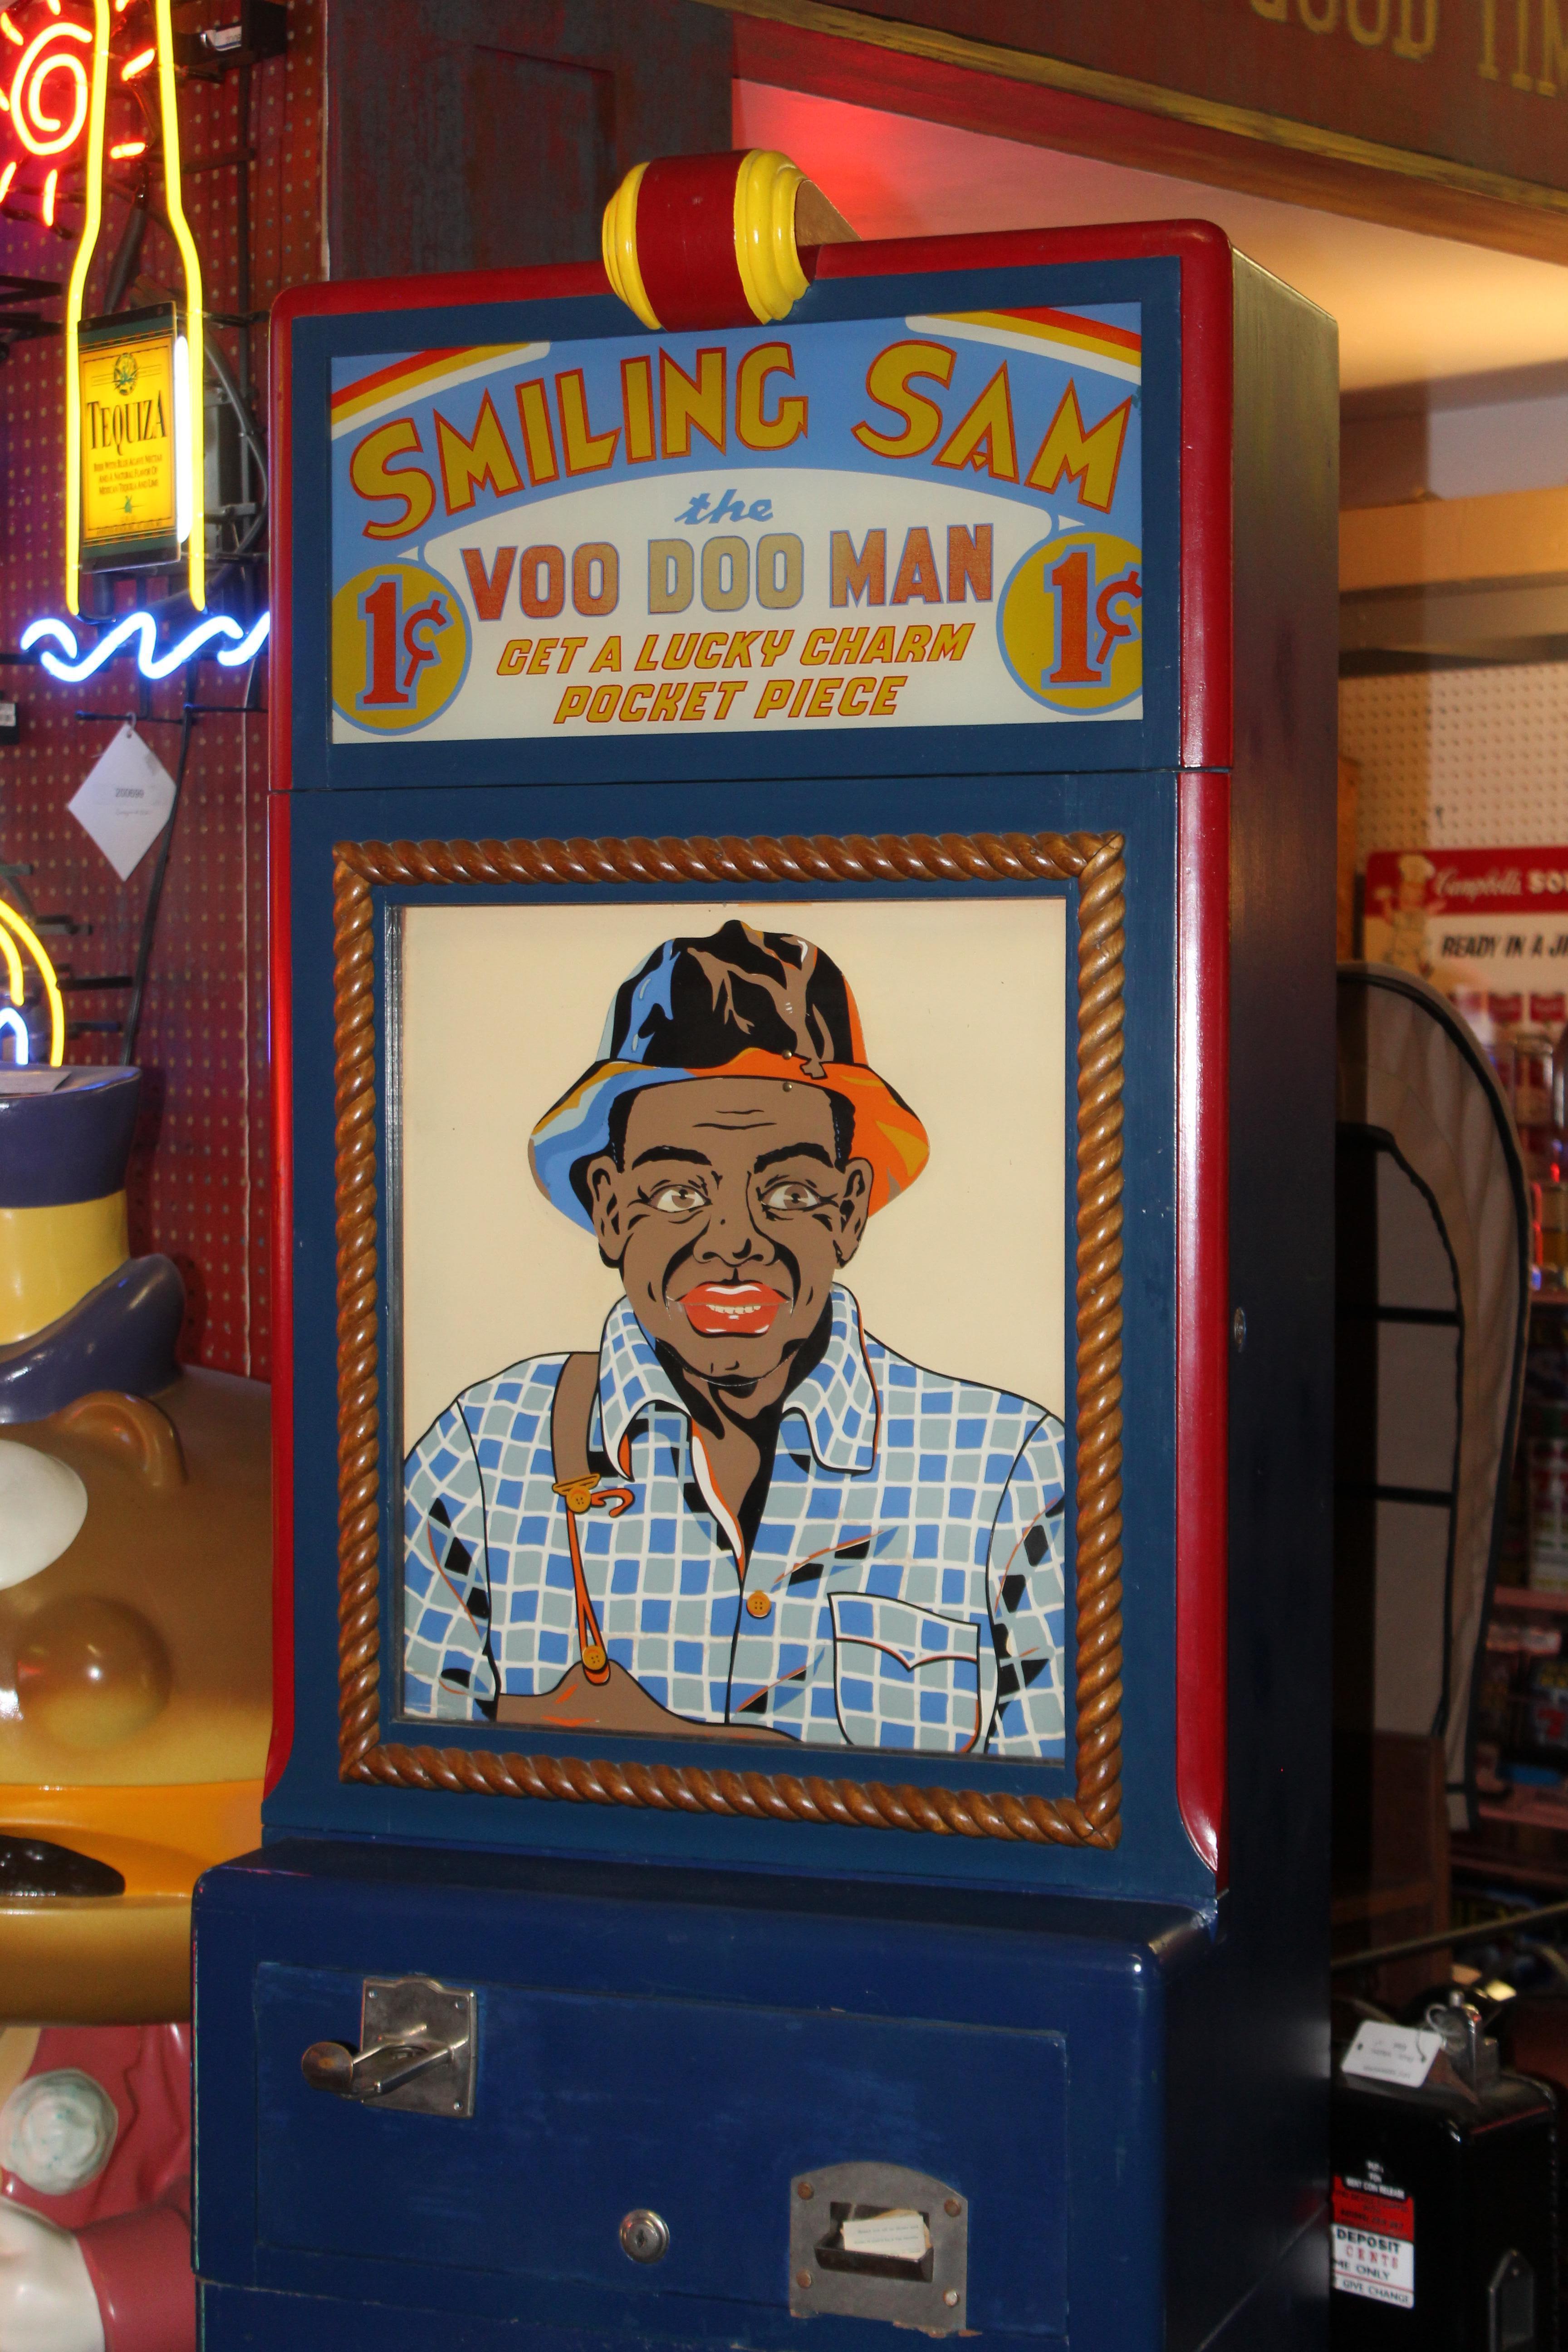 Animated fortune teller made by Mike Munves Mfg. in 1939. This professionally restored piece features a man, Smiling Sam, whose face changes as he thinks and then dispenses a small fortune card. One key is provided. While this is a 1¢ machine, it